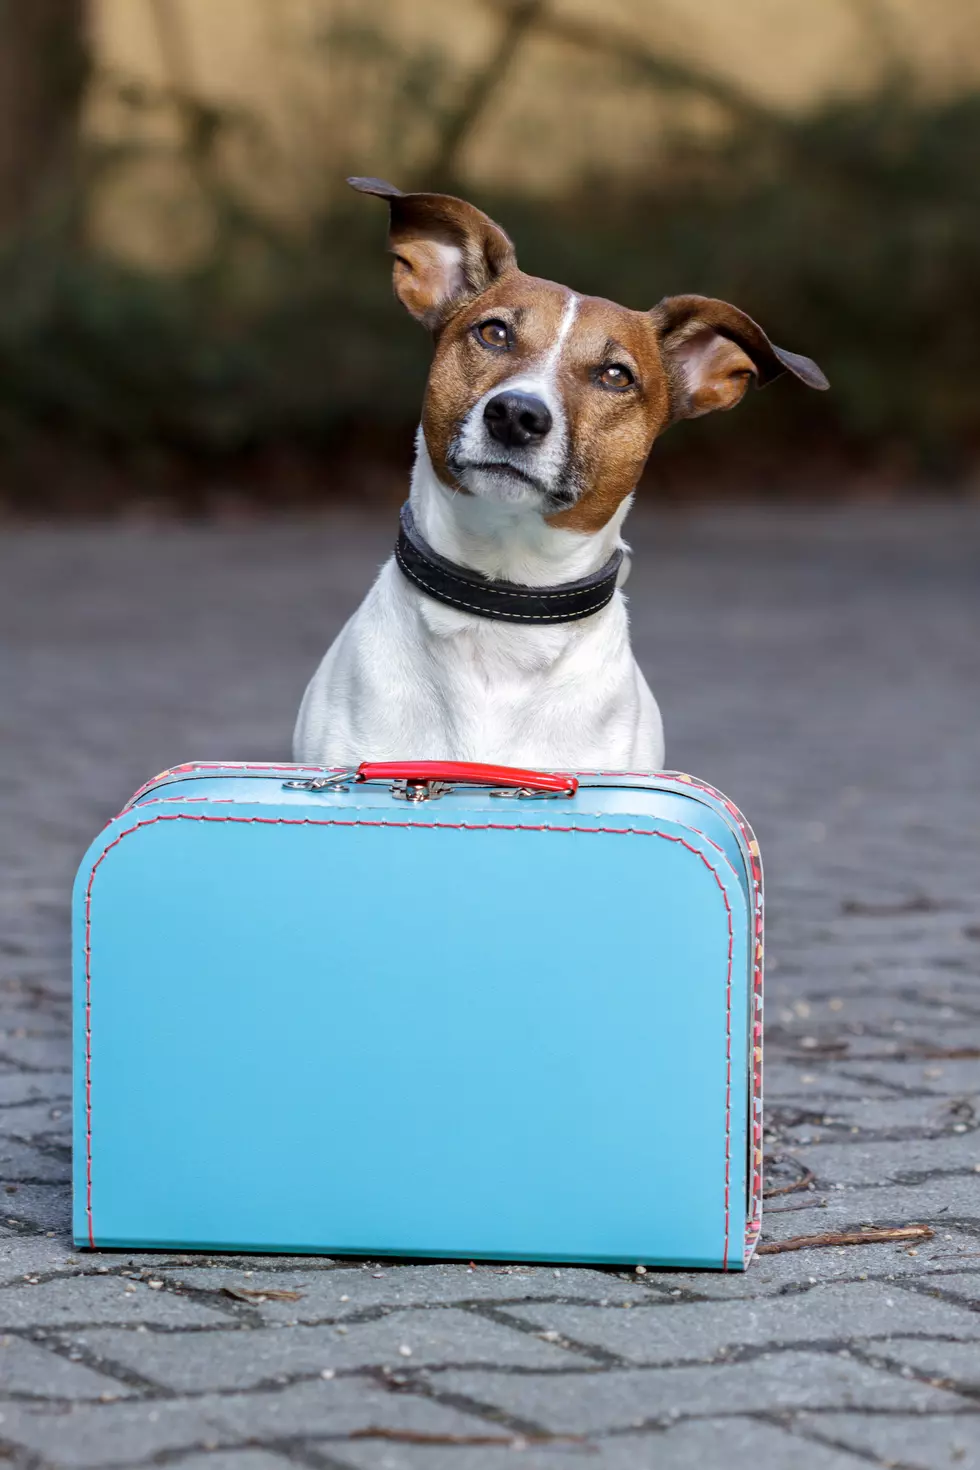 My Boyfriend Moved In And I Kicked Out His Dog – Leo and Rebecca Buzz Question